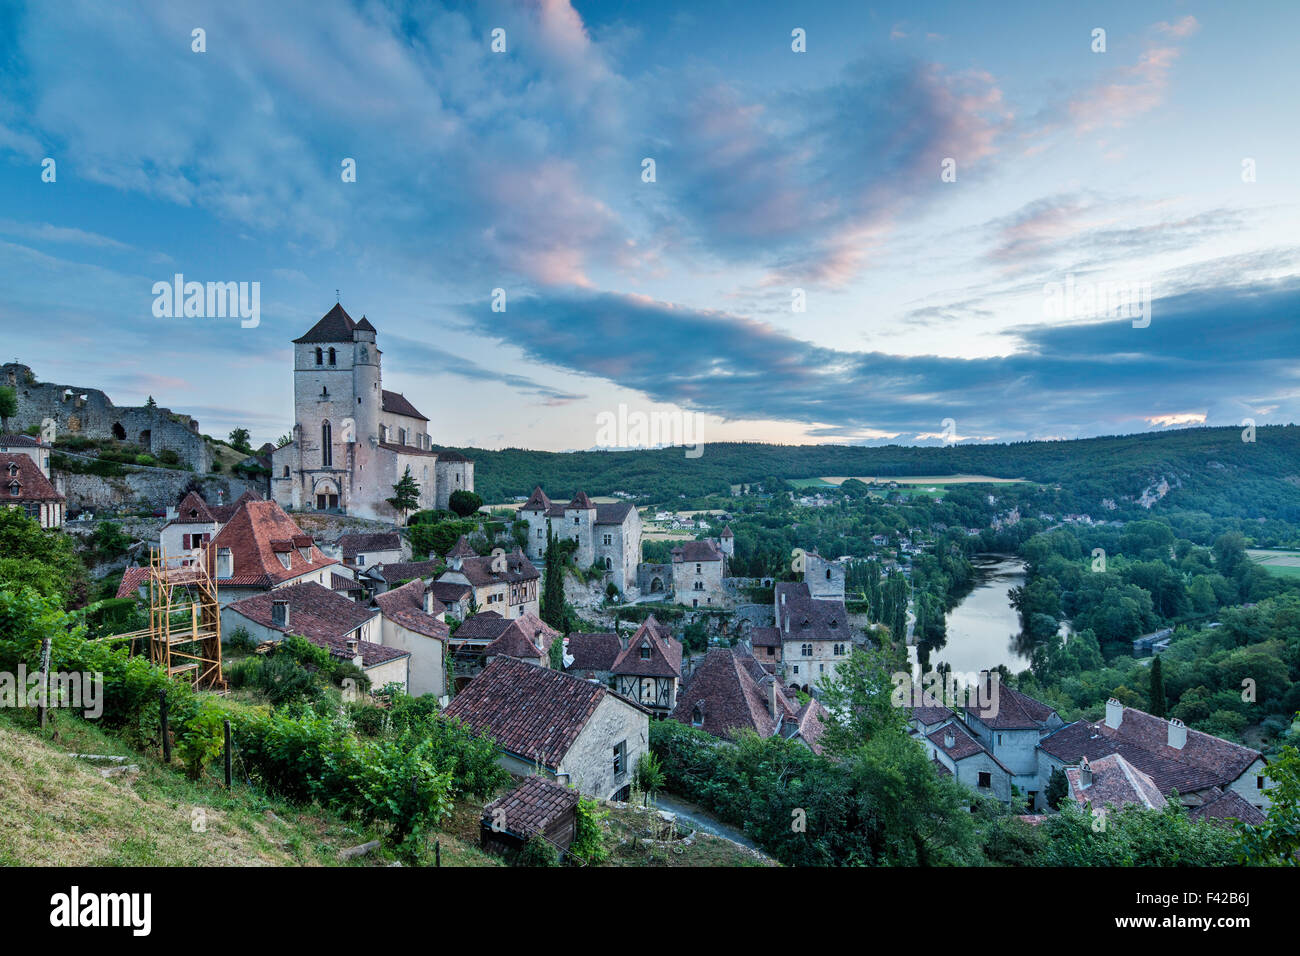 St Cirque Lapopie at dawn, Lot Valley, Quercy, France Stock Photo